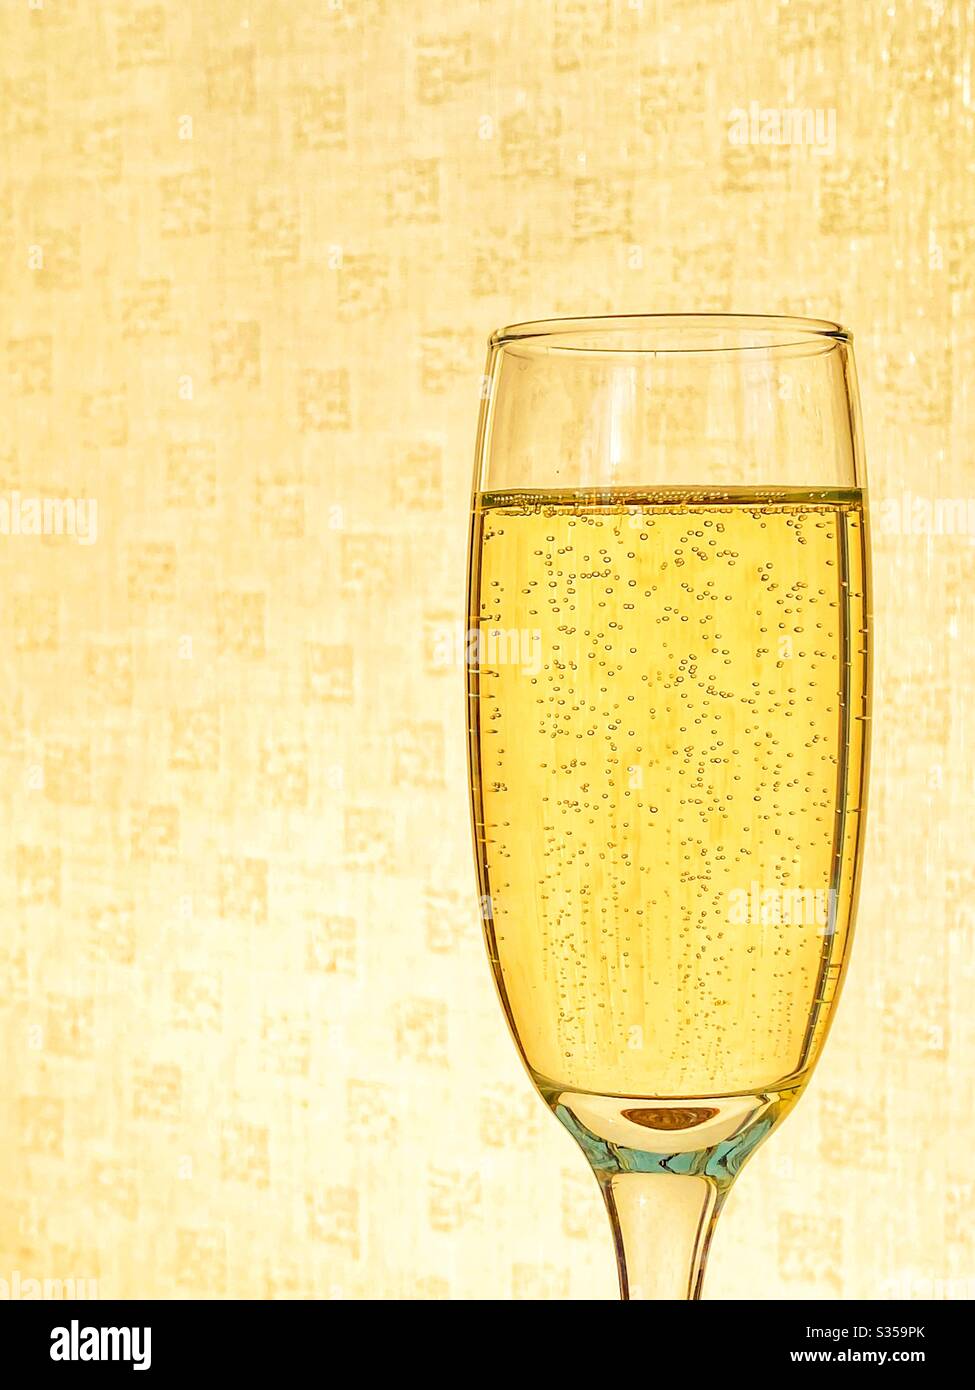 Flute glass of champagne against a plain background backlit by sunlight Stock Photo